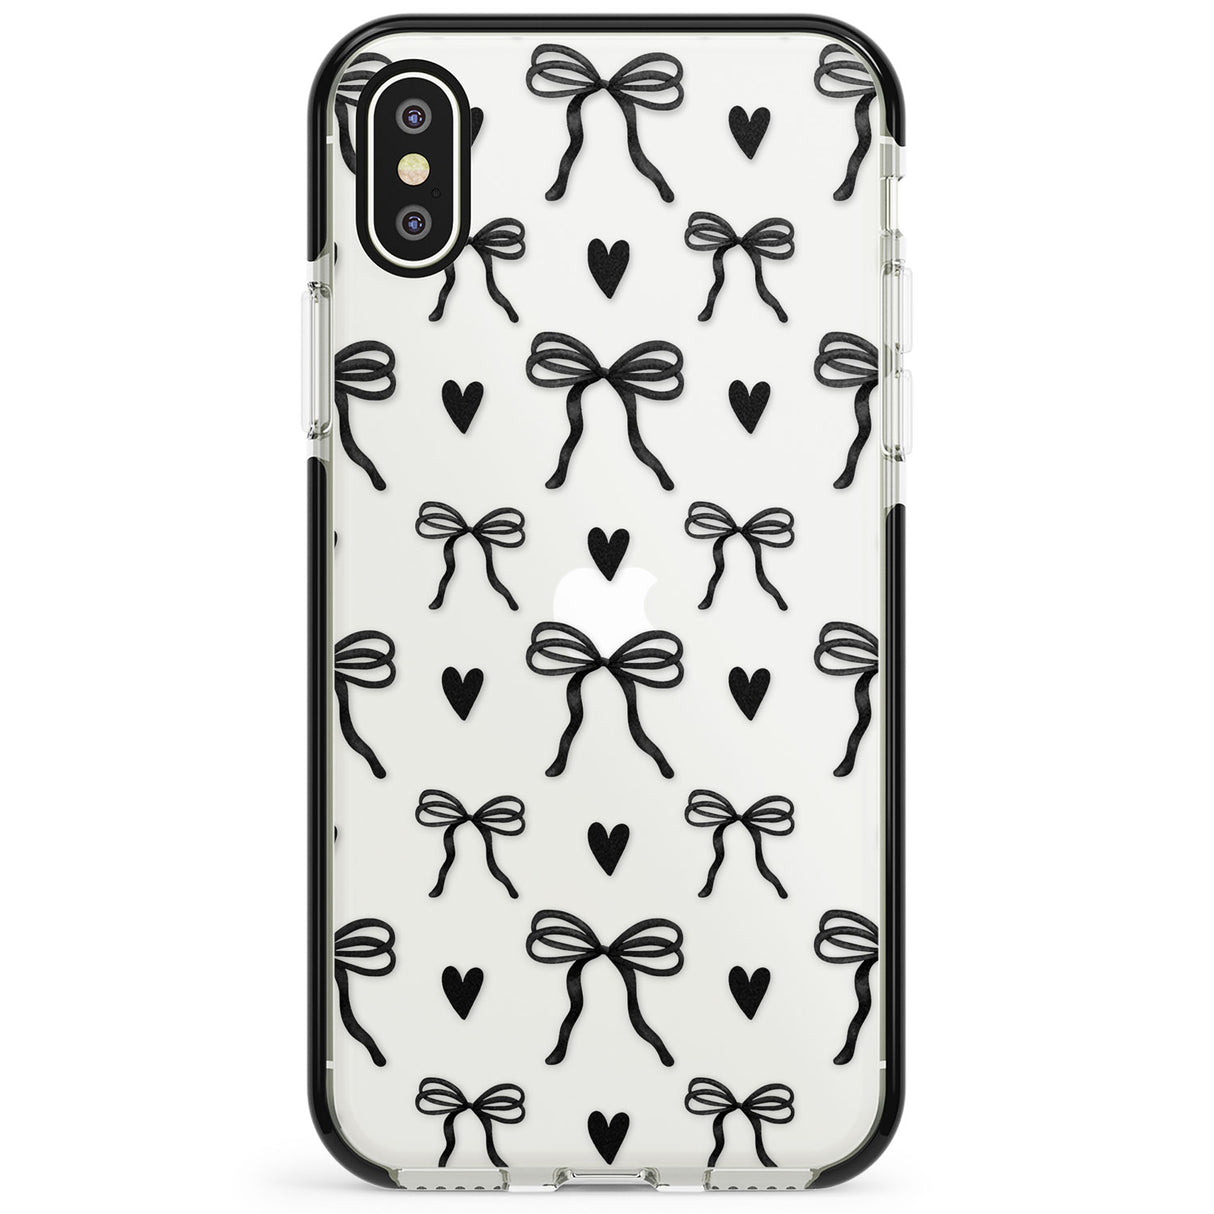 Black Bows & Hearts Phone Case for iPhone X XS Max XR